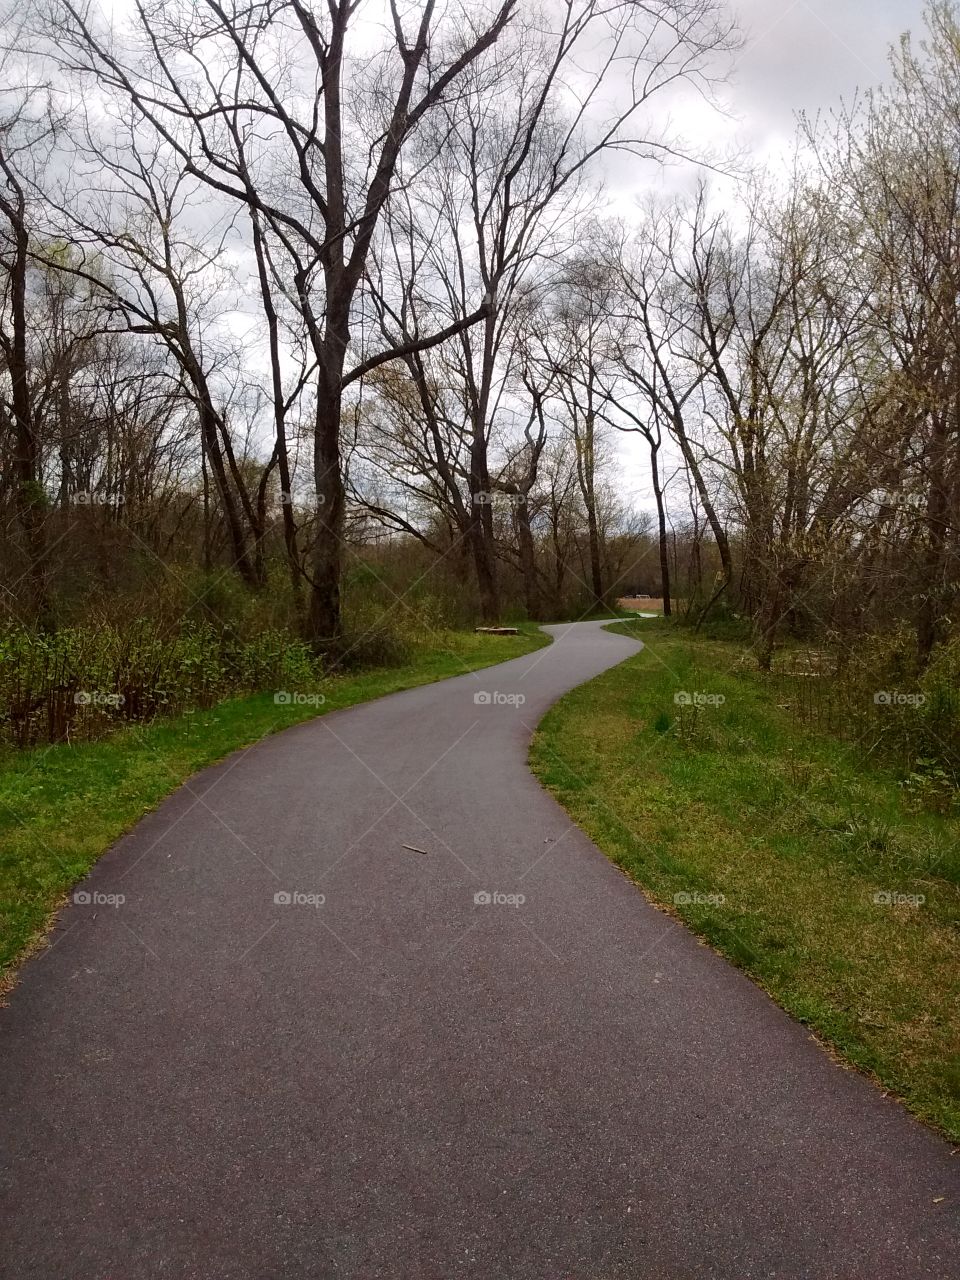 Green way path near Ararat river. mt airy NC, home to Andy Griffith and Mayberry